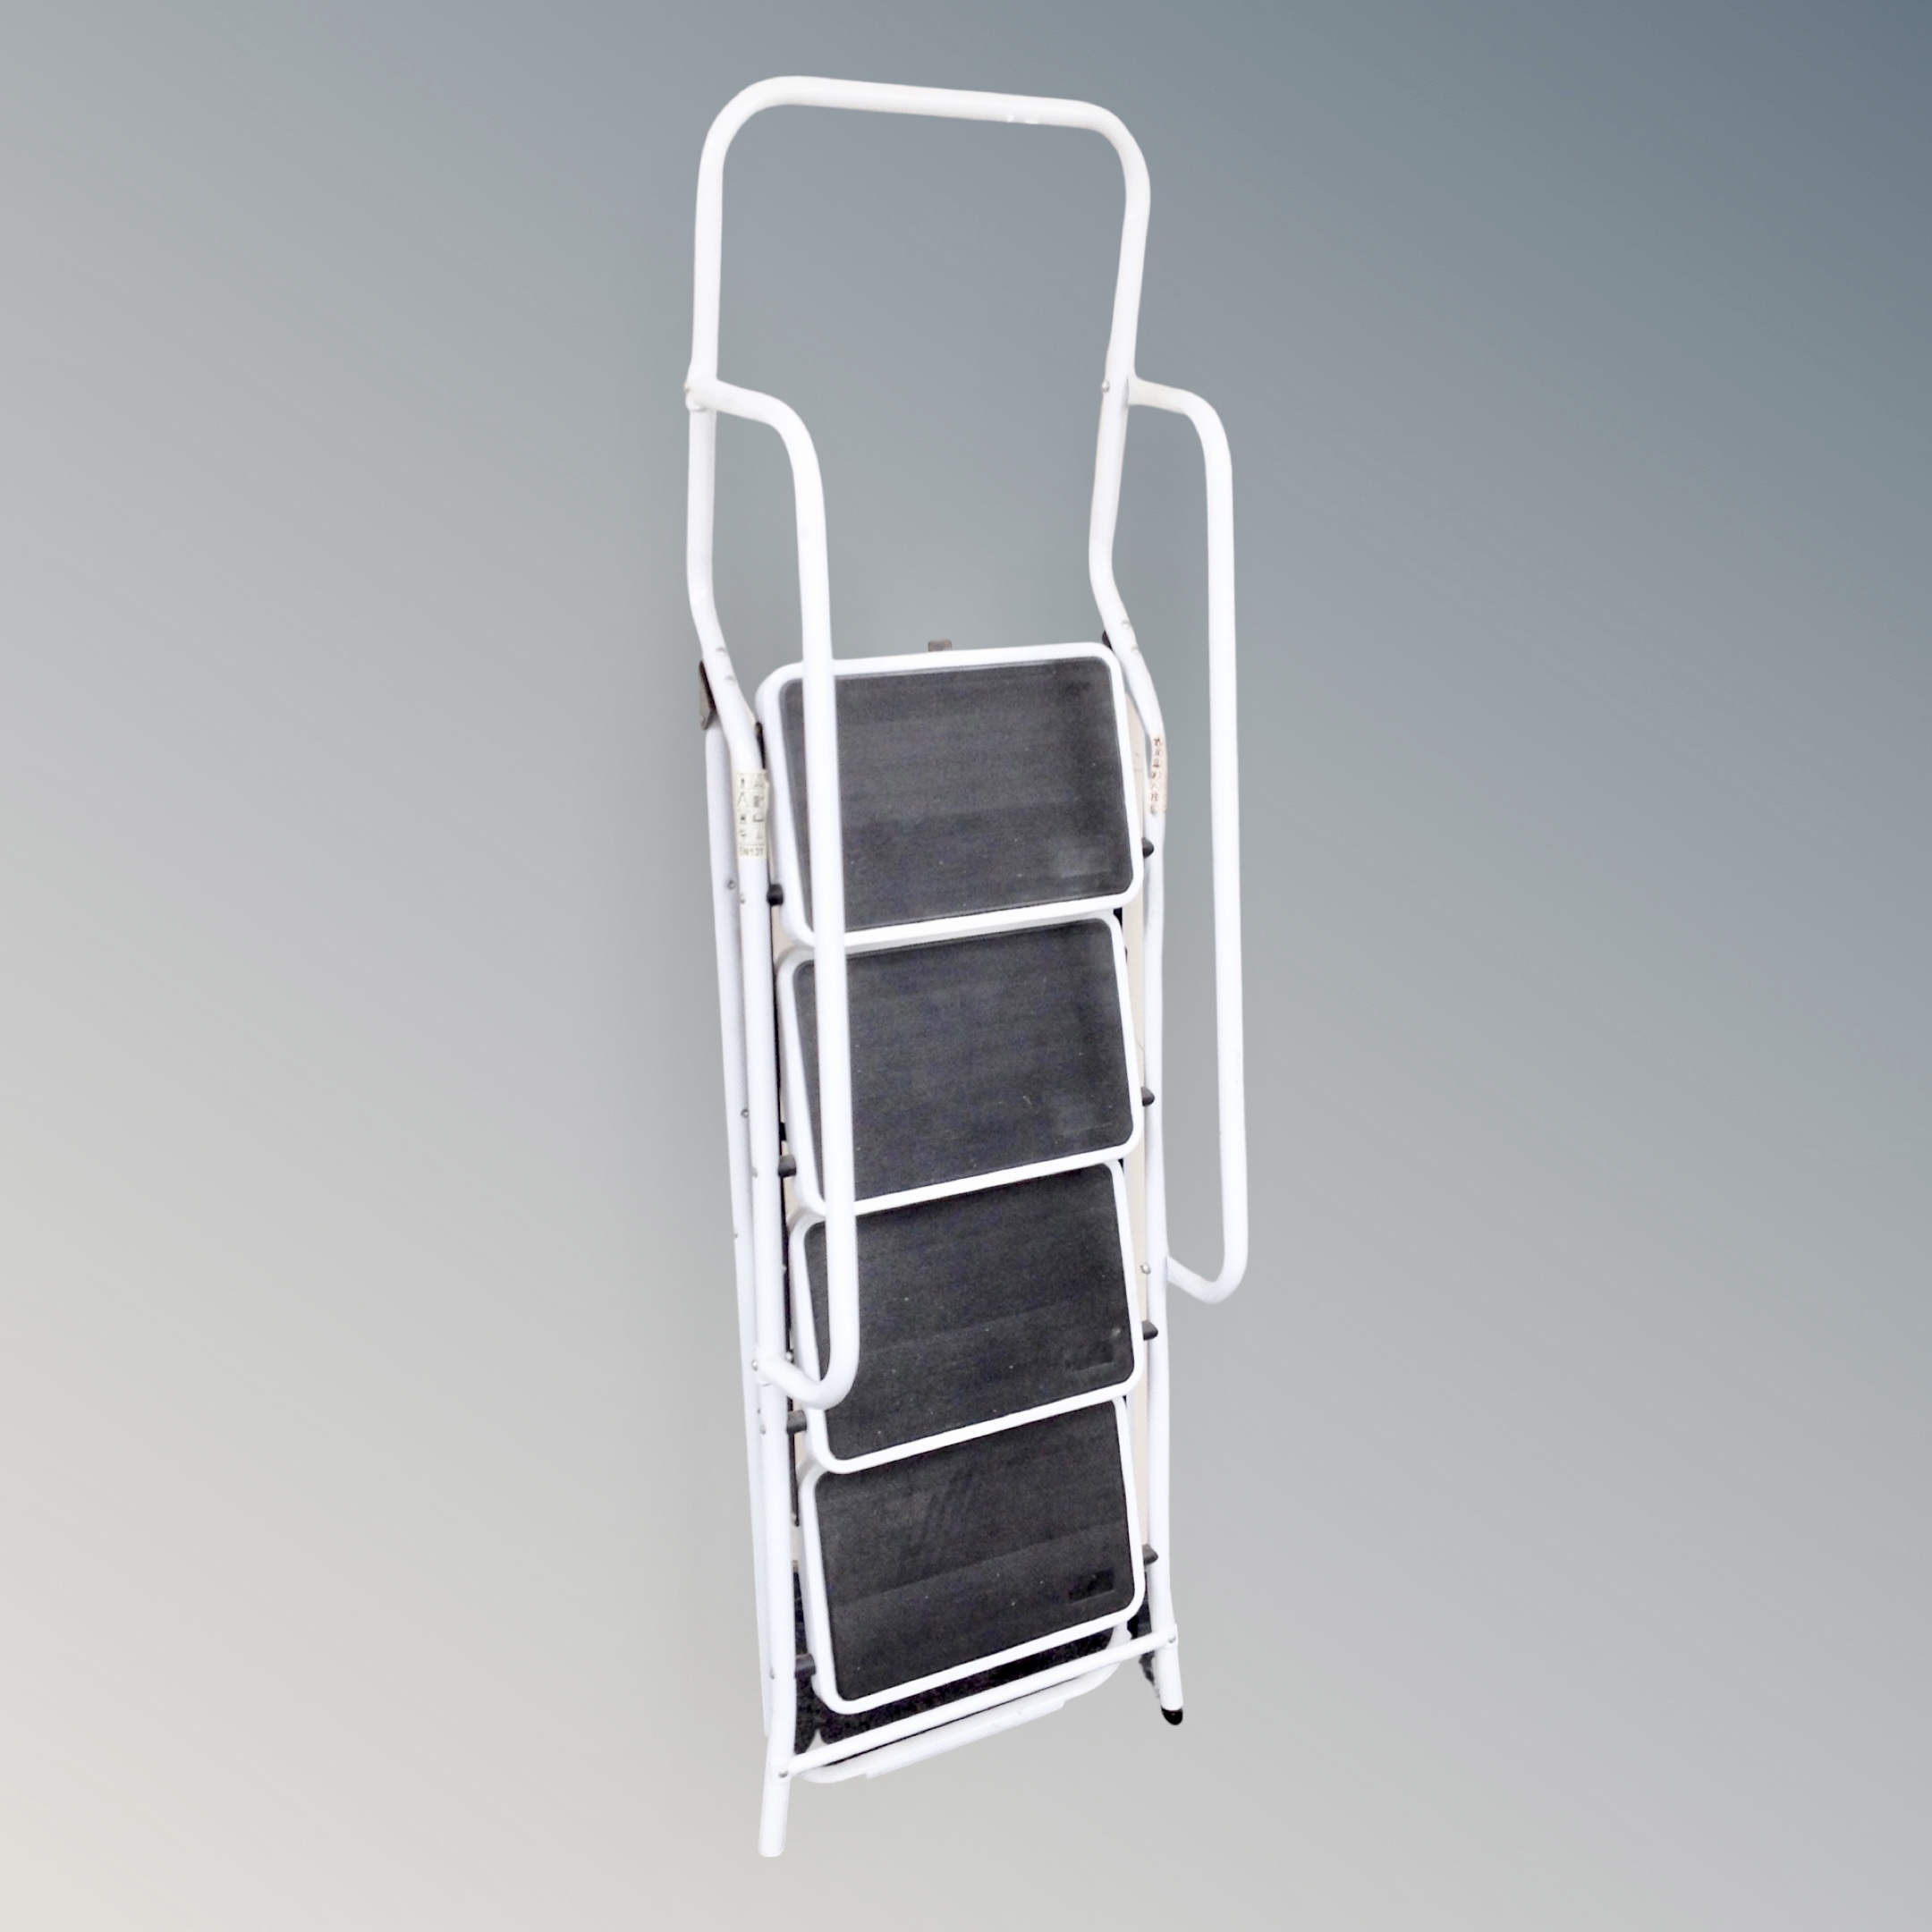 A four tread folding step ladder with double hand rail